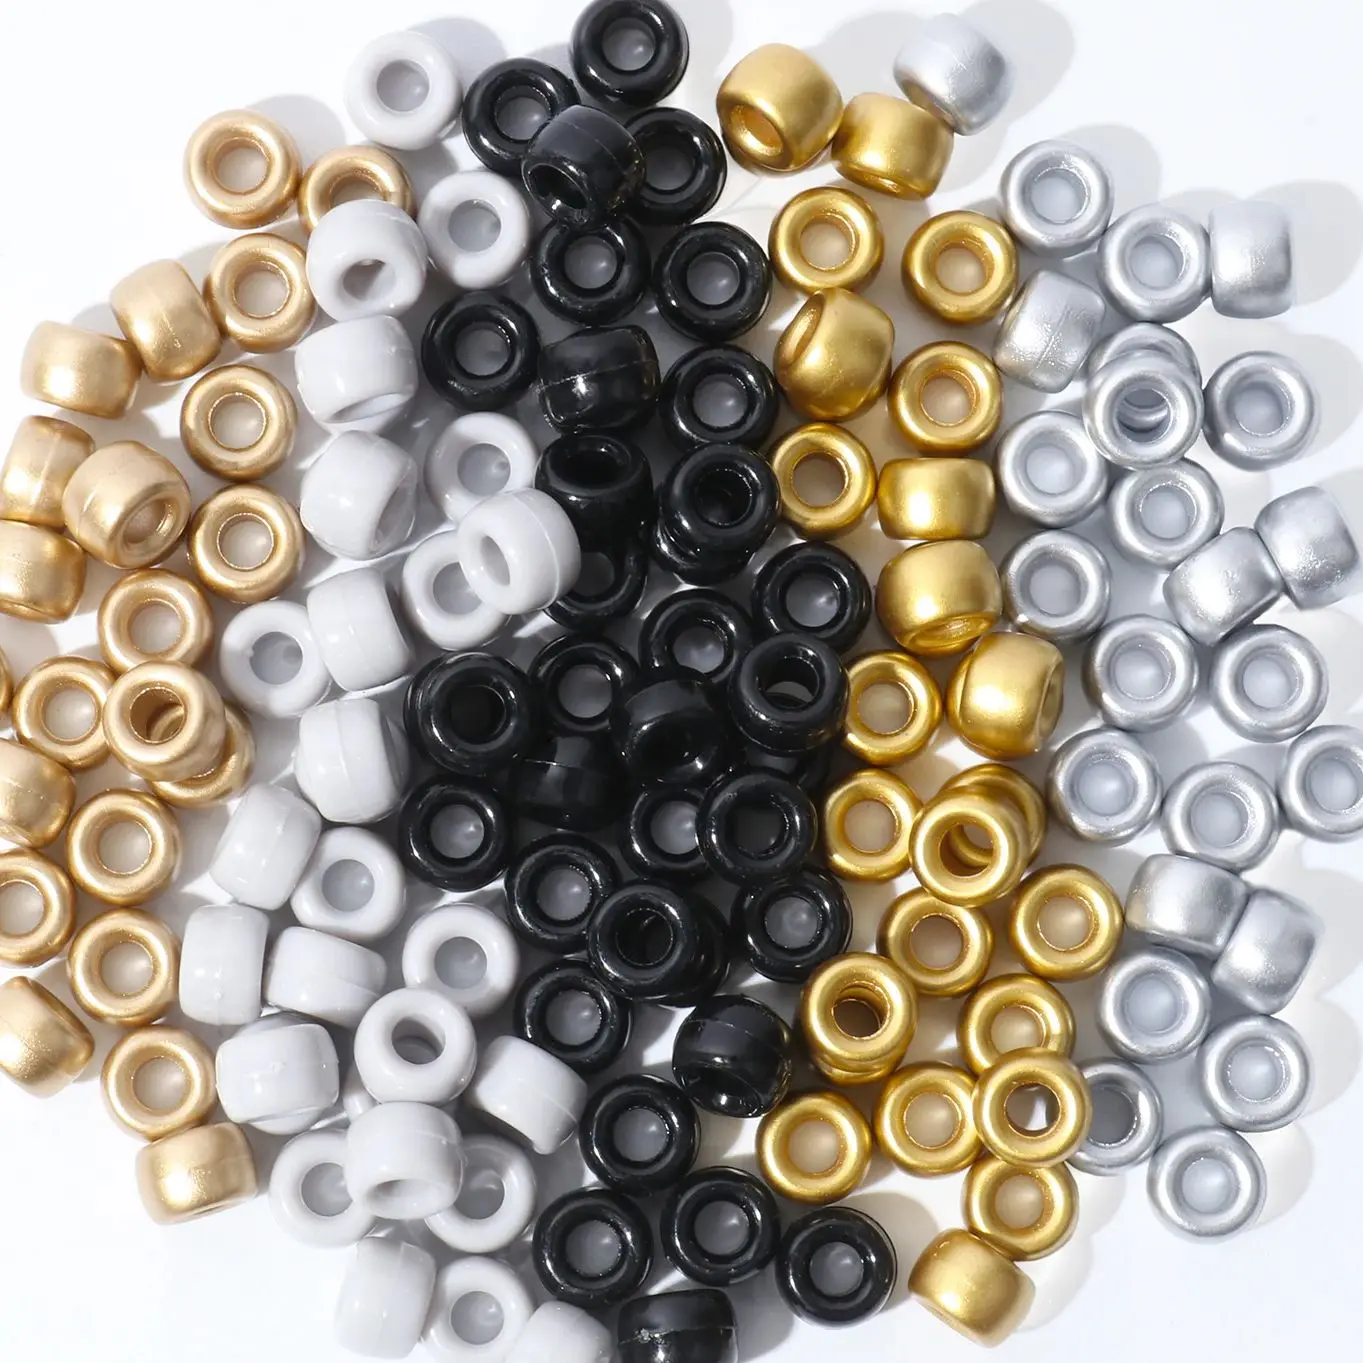 

Wholesale 1200pcs Pony Beads Gold Color Acrylic Flat Round Spacer Bead Jewelry Handmade Charms Make Bracelets Necklace Accessory